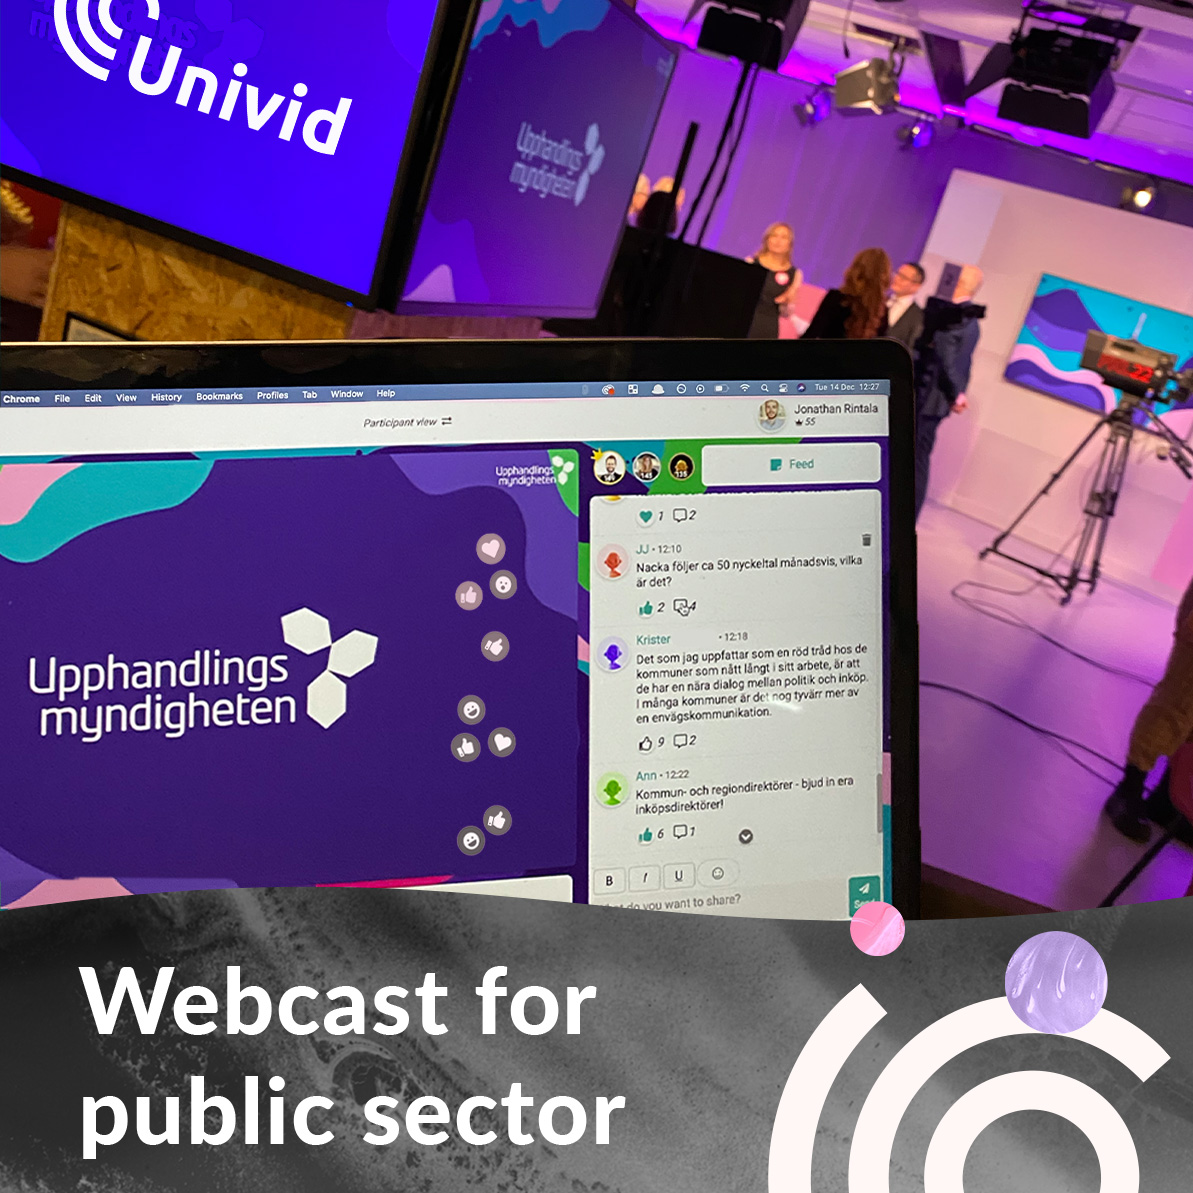 Who could have guessed that one of Sweden's most beautiful digital events is held by a national agency? At Univid we were really impressed by The National Agency for Public Procurement's stylish graphic profile that flowed through the entire webcast they chose to livestream on Univid. A webcast that was not only great content-wise, but also interactive with a lot of reactions, questions and discussions in the chat. A perfect forum for bringing together leading municipal politicians from all over the country in a live broadcast.